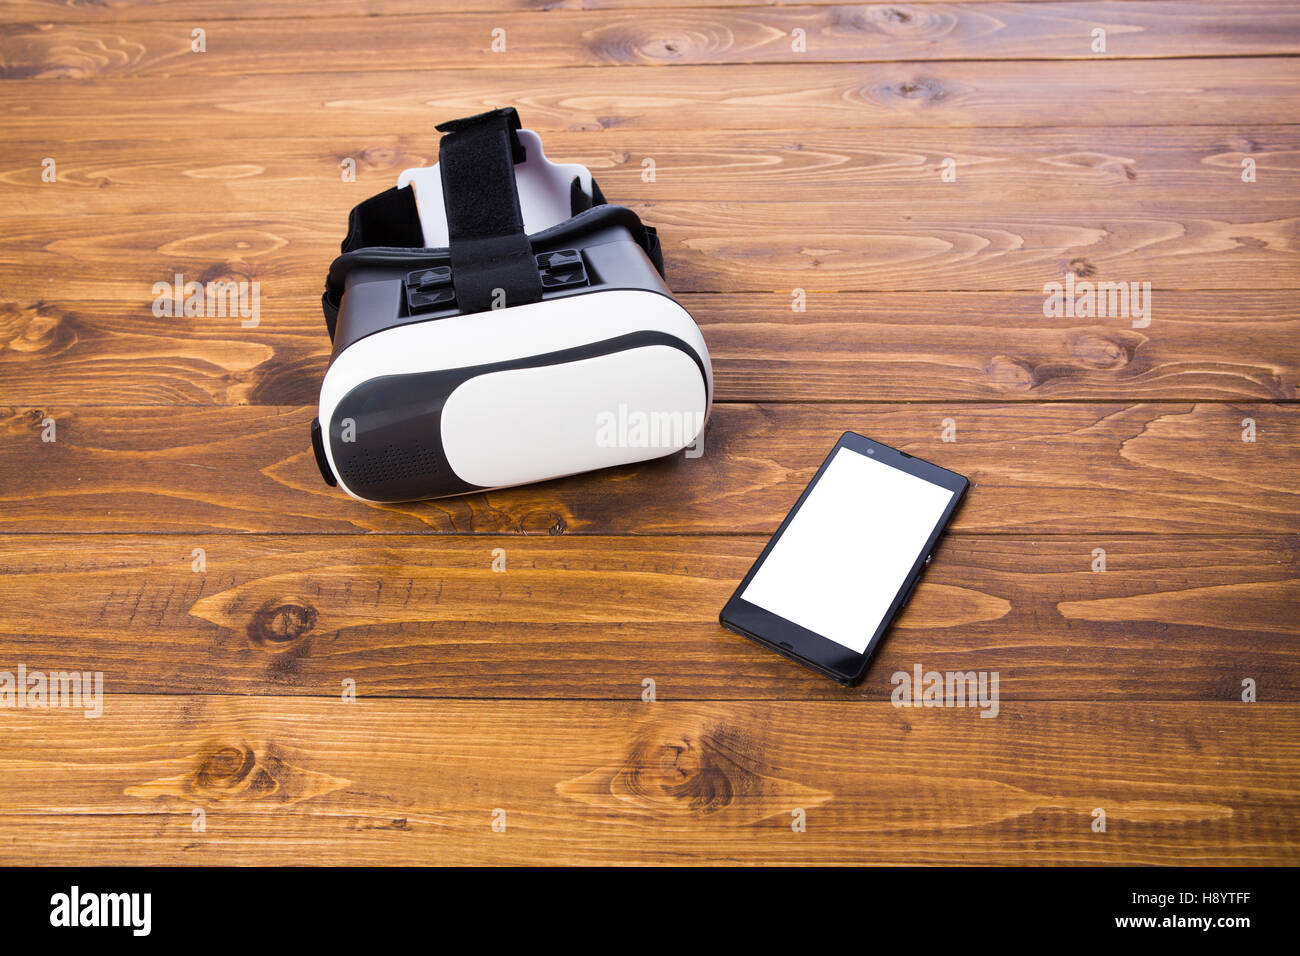 front side of a vr headset and a smart phone, isolated on wooden floor background, close up Stock Photo